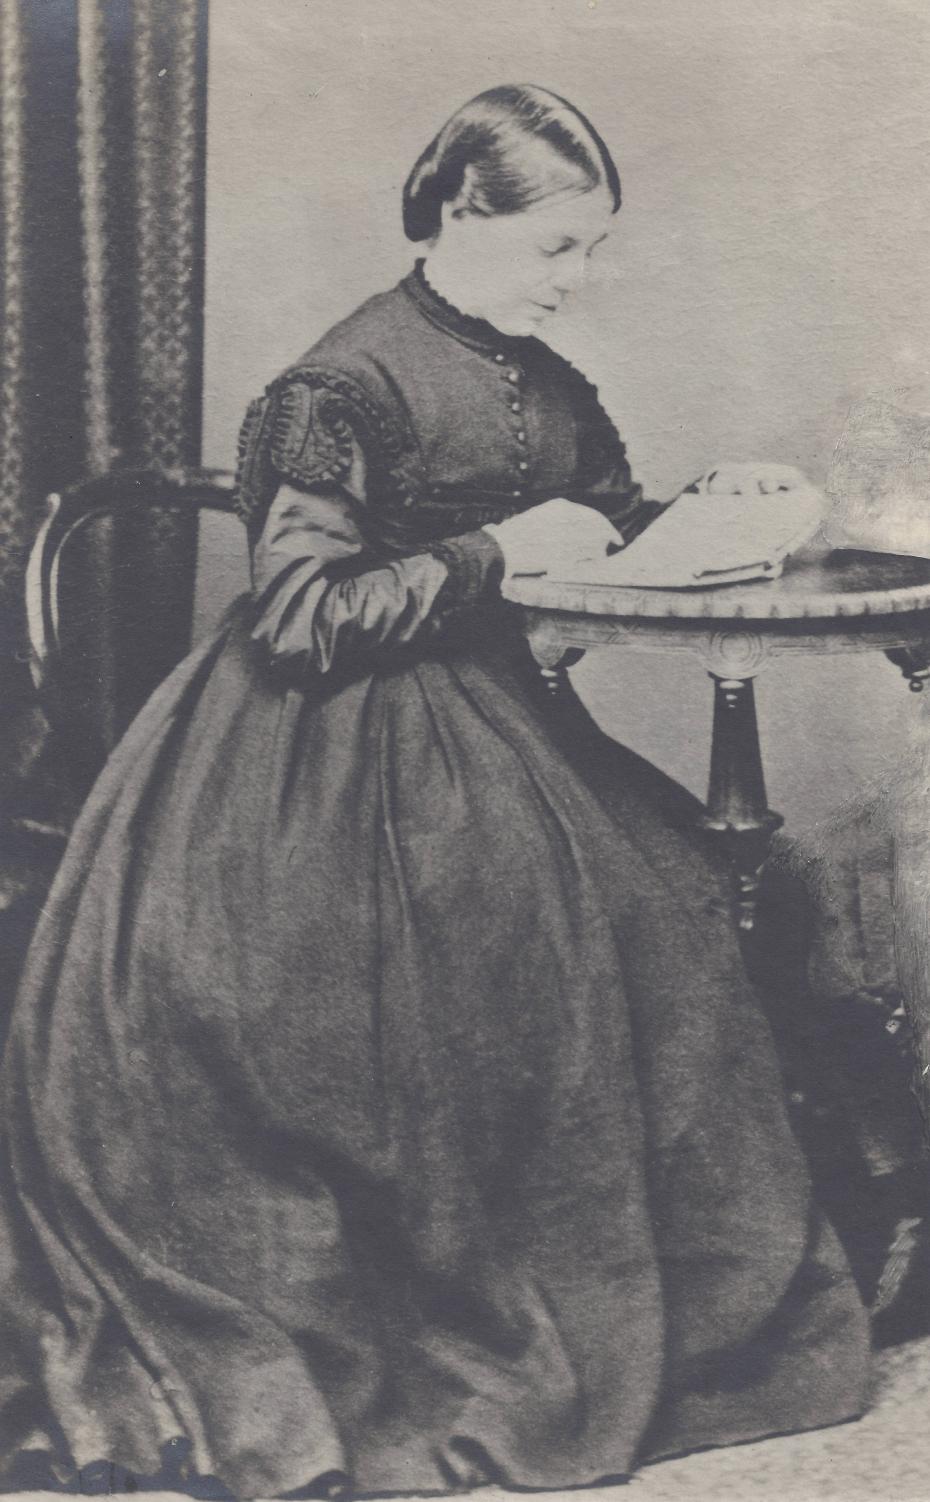 Possibly a photograph of Anne Austin, née Crow, by an unknown photographer, circa 1870 (archive reference: GCPH 5/3/1)